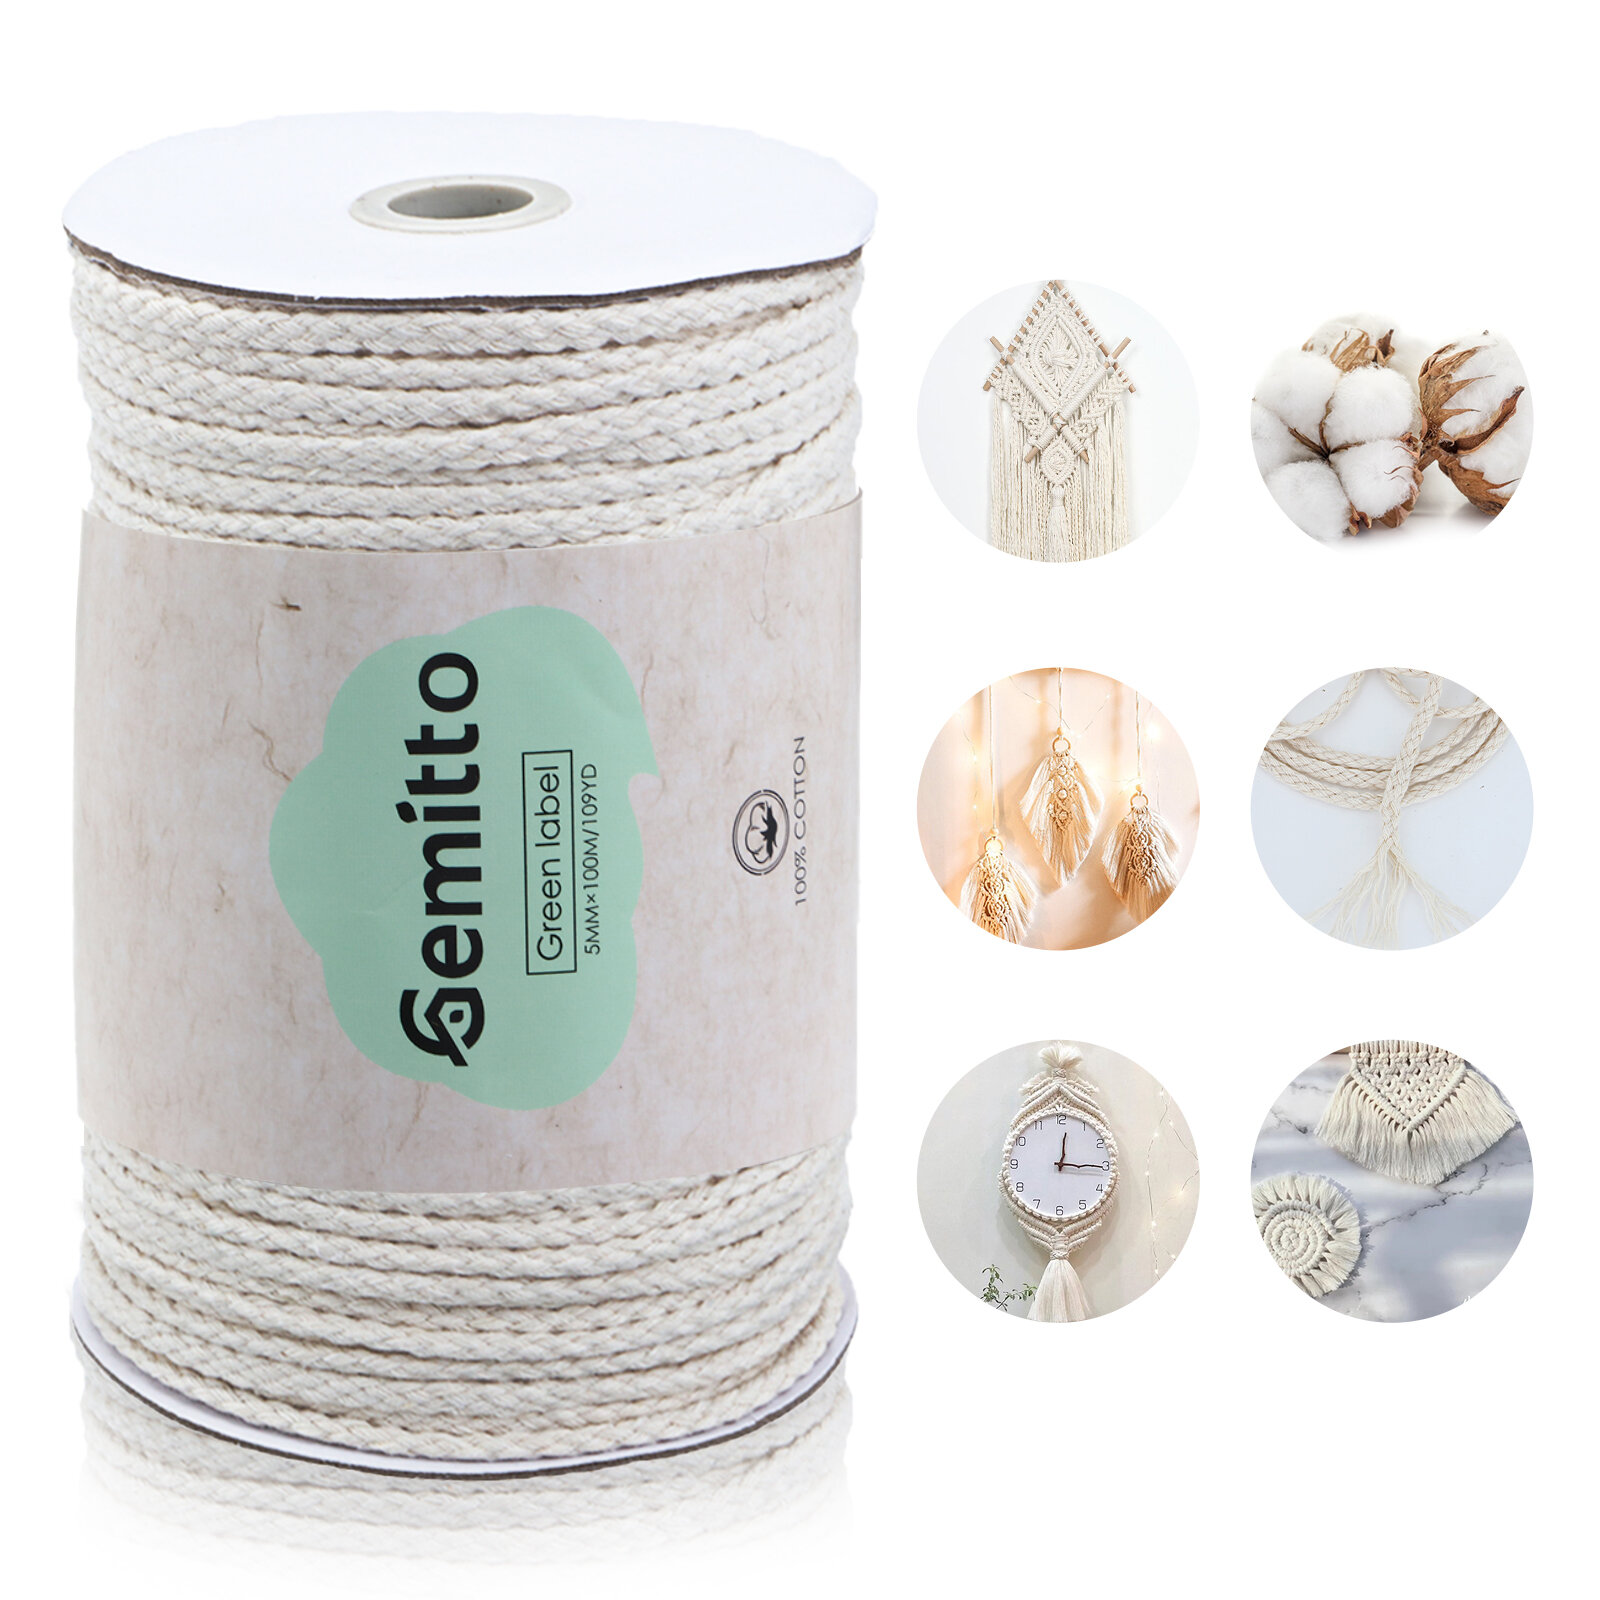 GEMITTO 100m Braided Rope Cotton Yarn Cords 100% Cotton DIY Craft Knitting Wall Hanging for Hand Kni